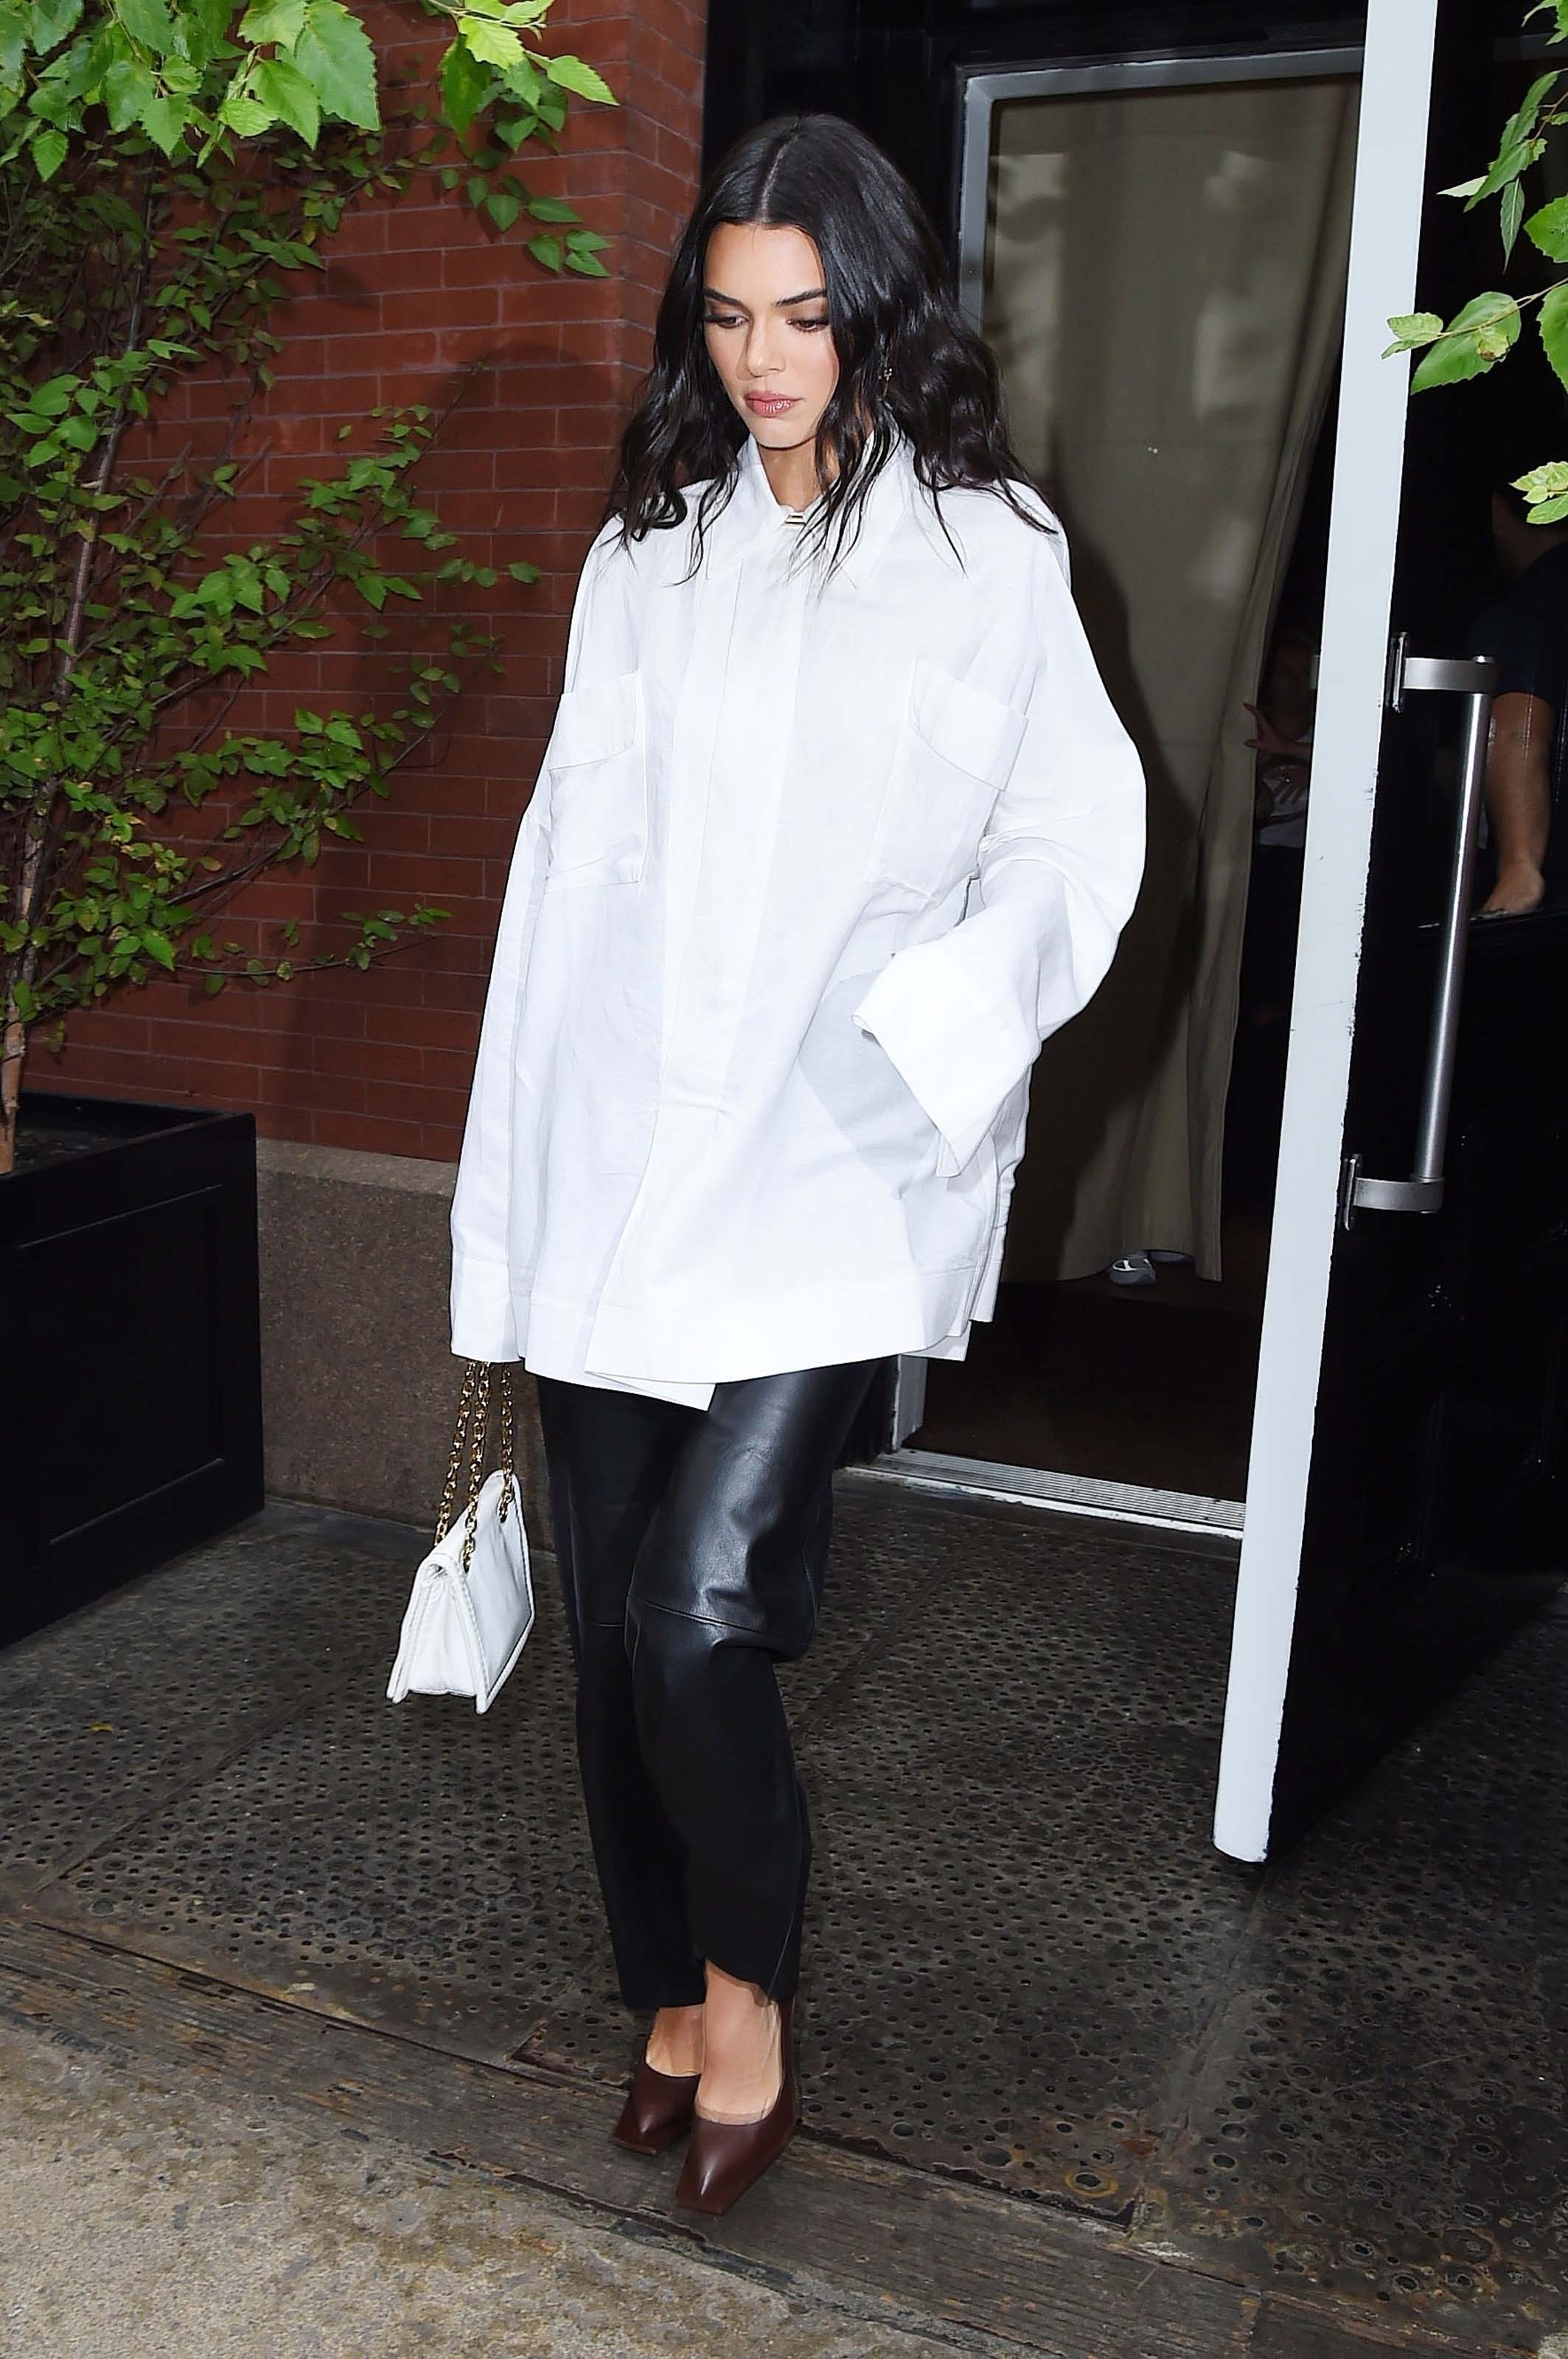 Kendall Jenner outside her hotel in NYC